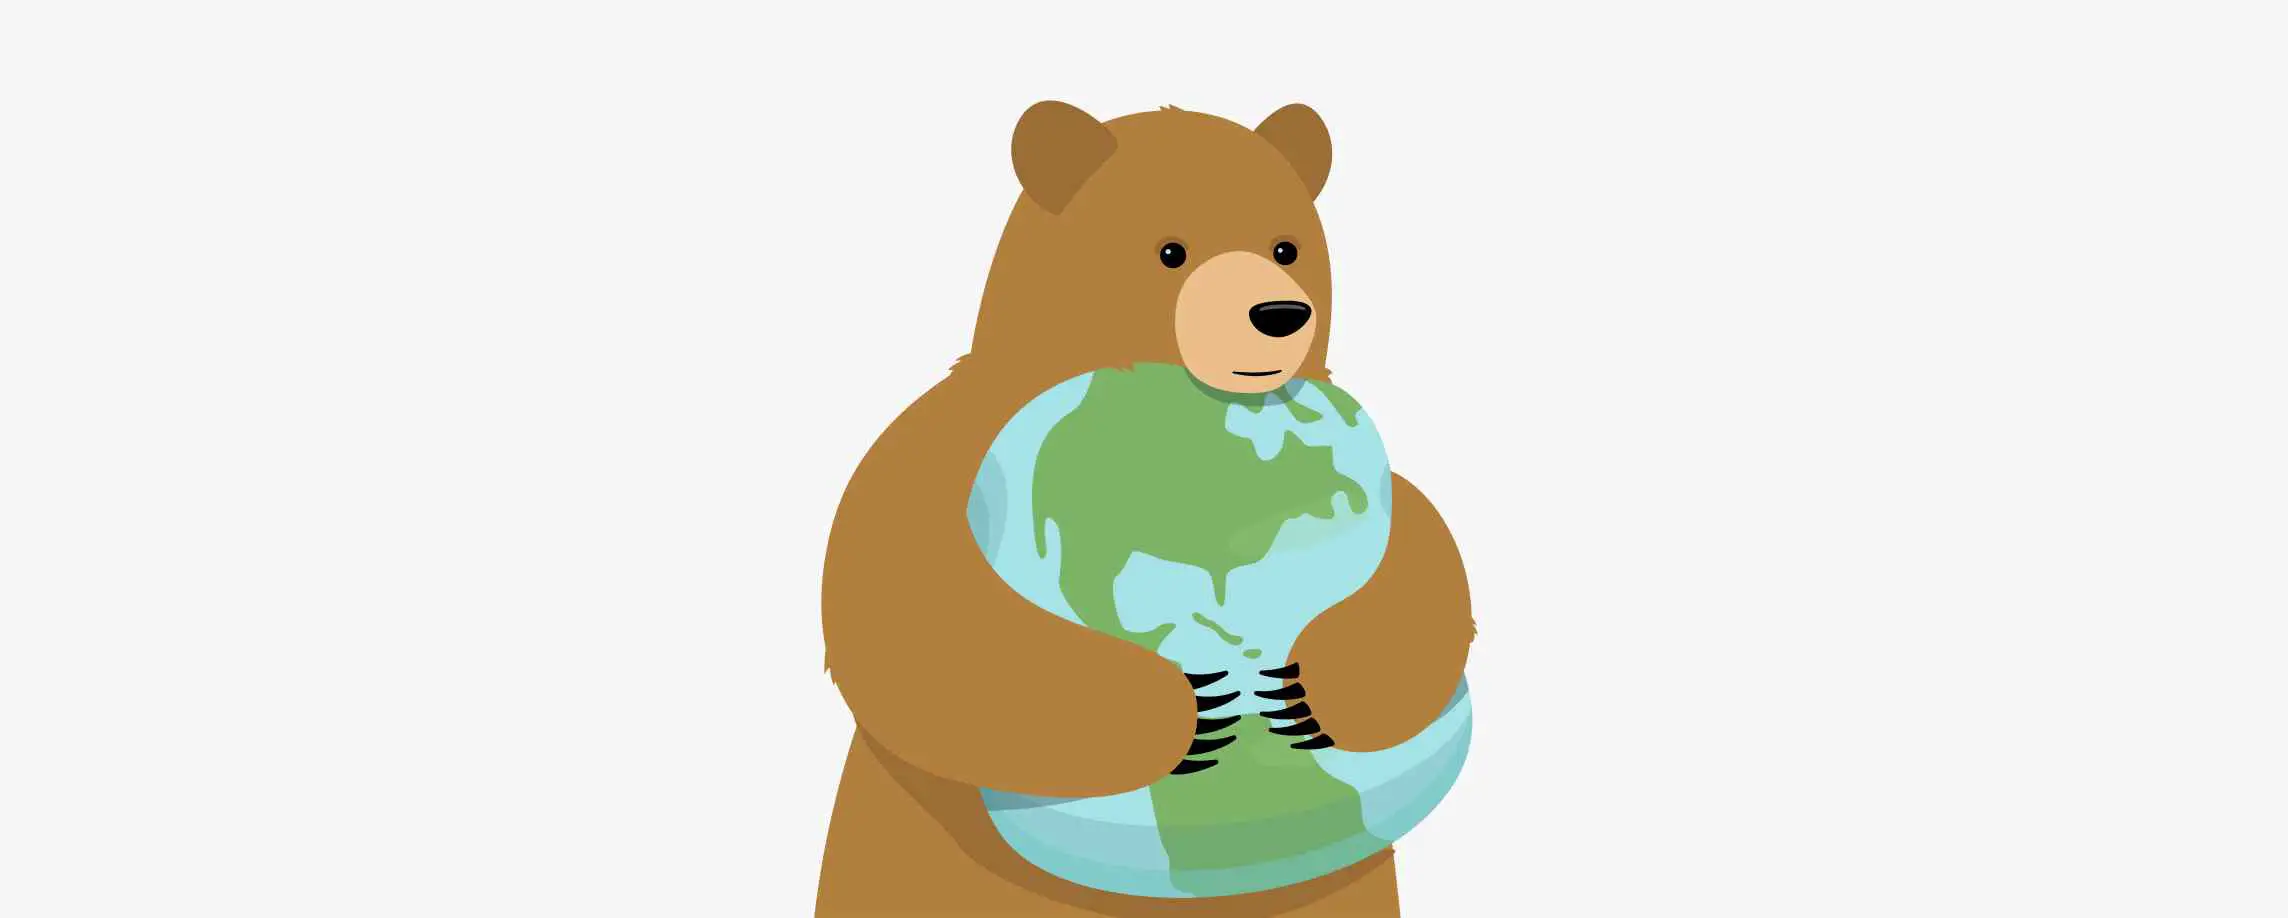 TunnelBear is a powerful and easy-to-use VPN service that is becoming increasingly popular among people who want to browse the web safely and privately.